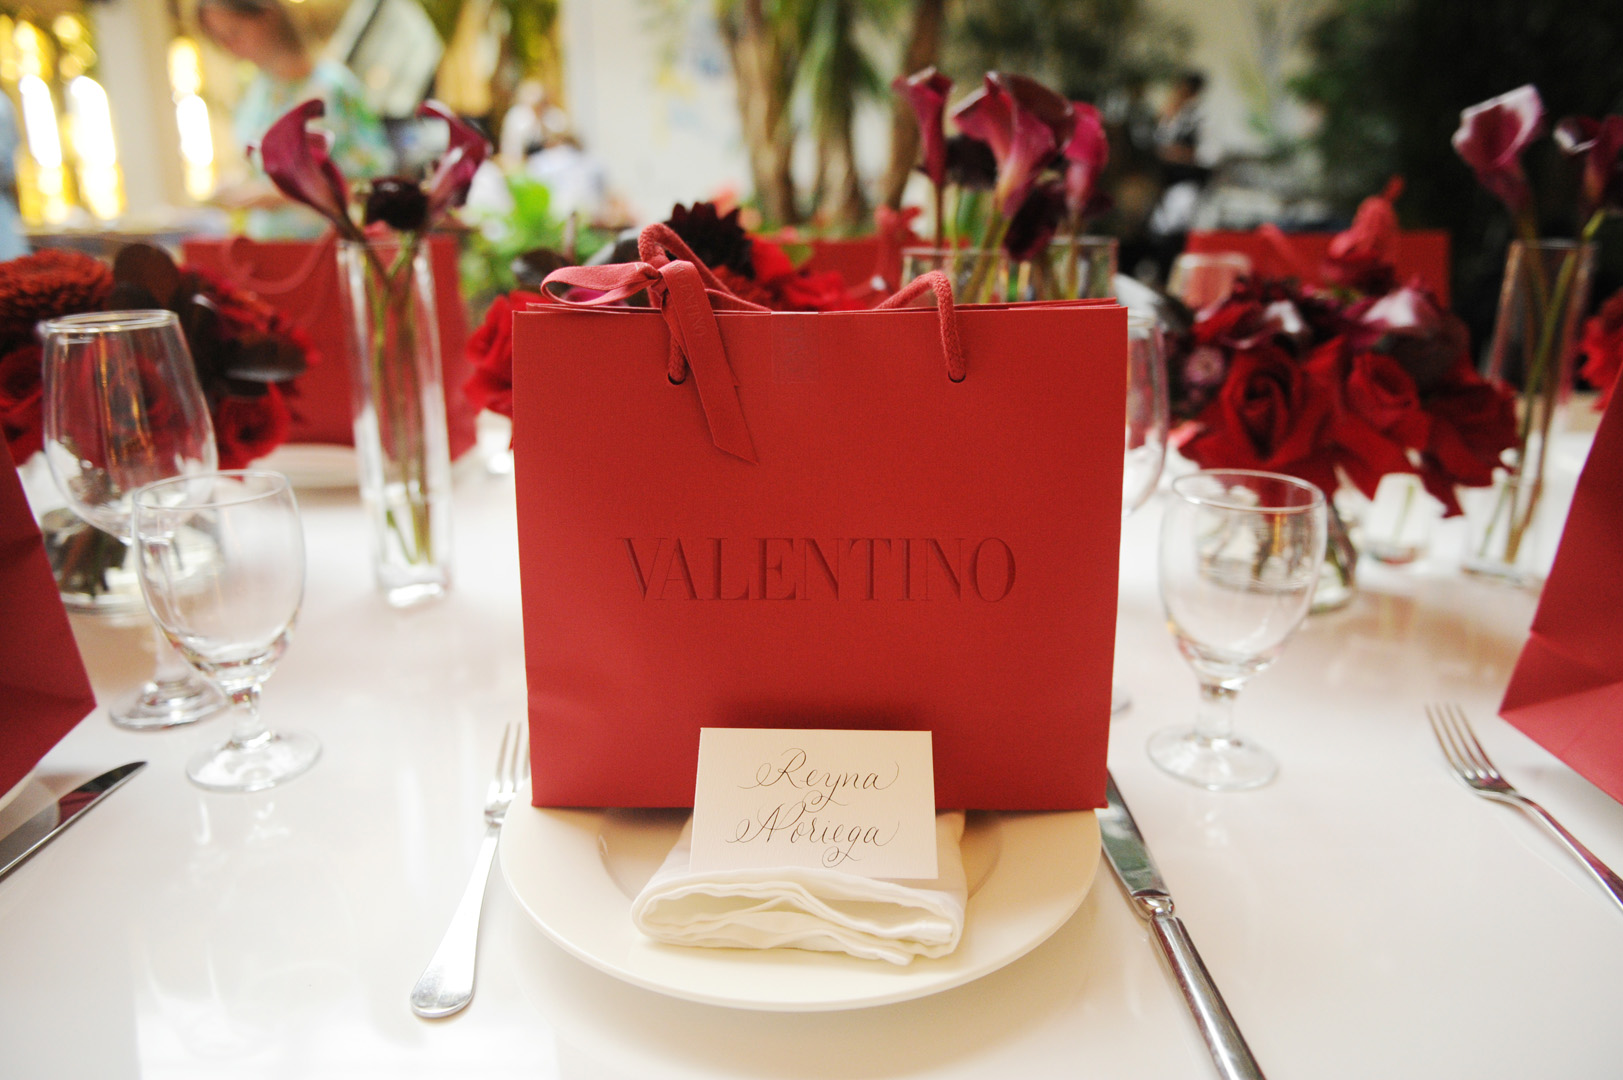 A dining placement with a handwritten name card and a red Valentino shopping bag